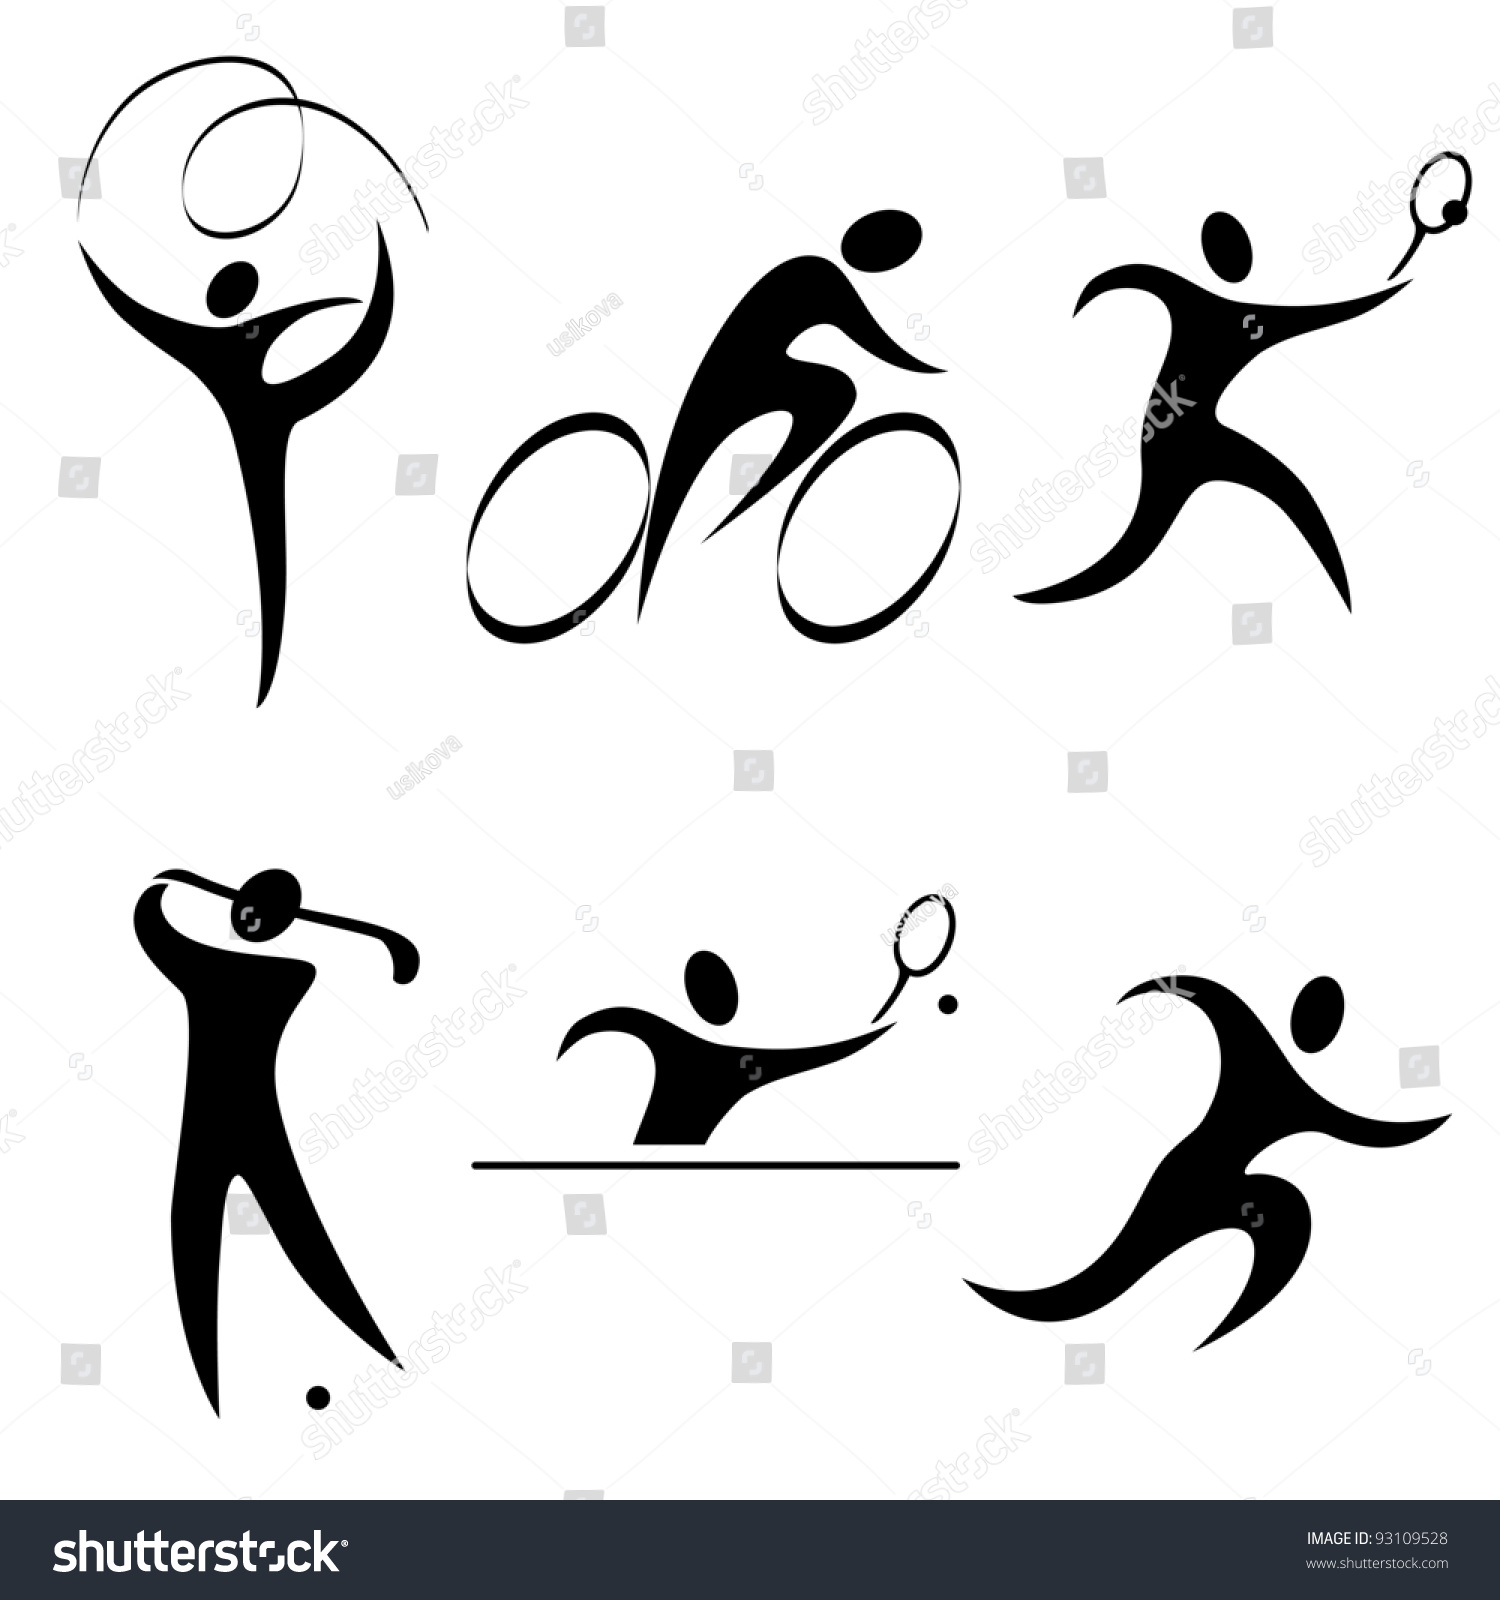 stock-vector-set-sports-icon-person-individual-sports-summer-olympic-discipline-vector-illustration-93109528.jpg